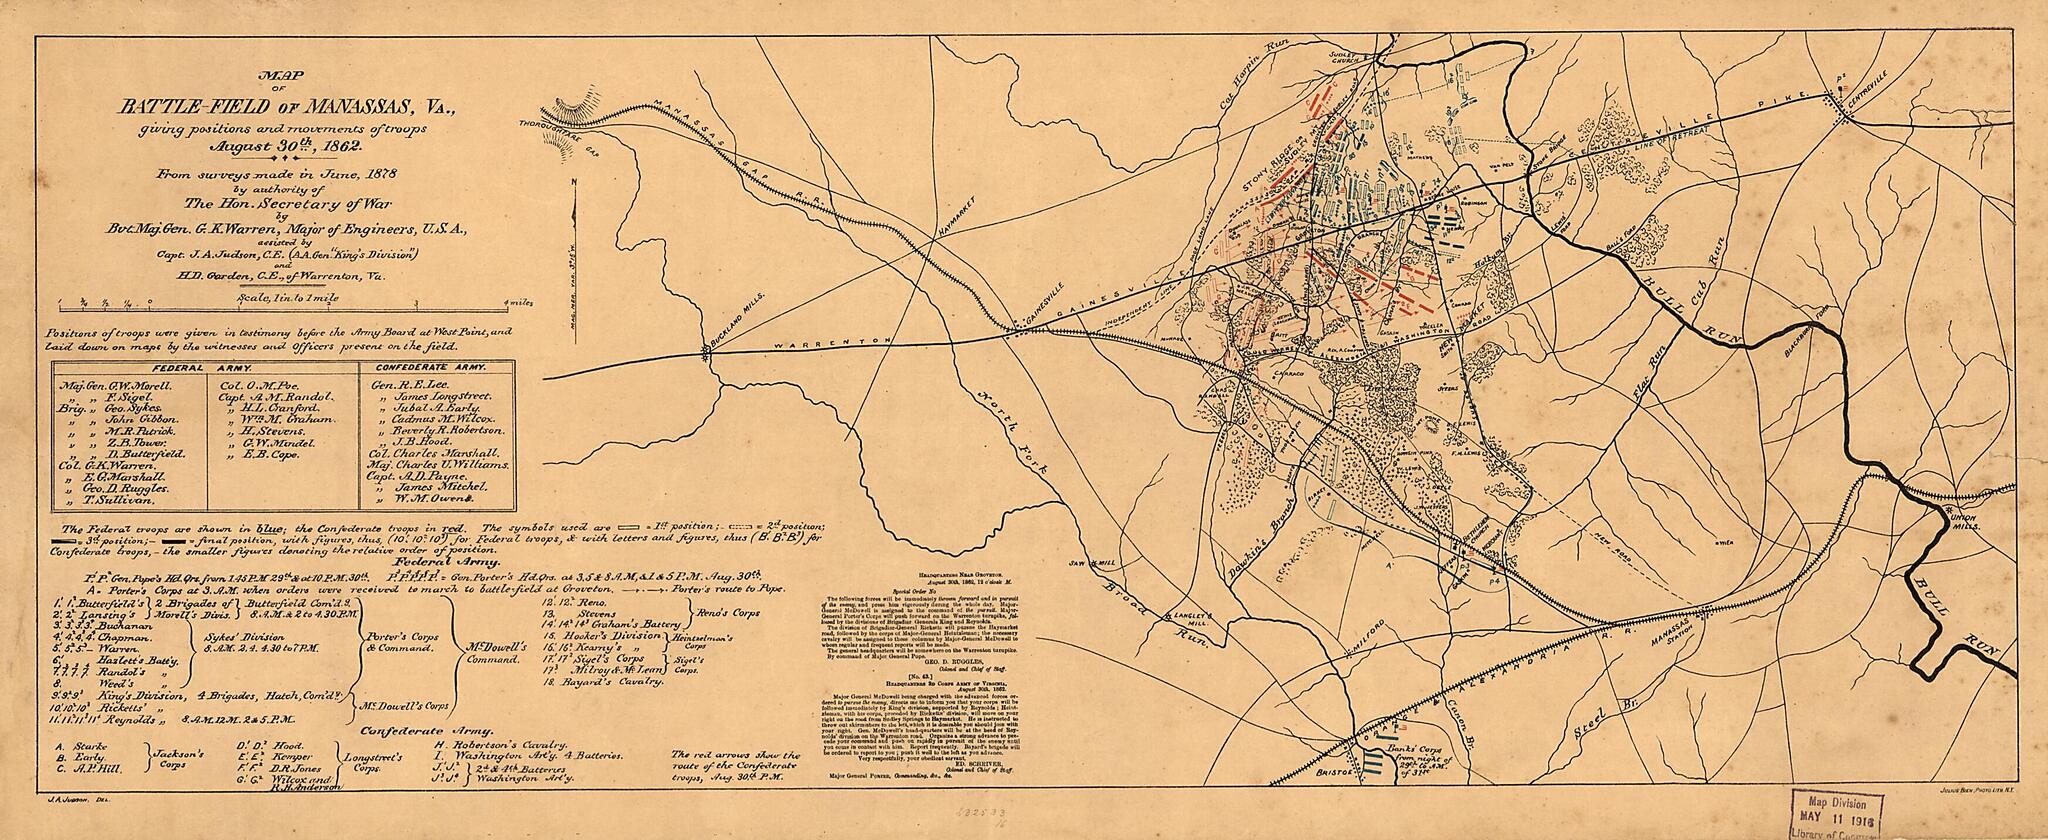 This old map of Field of Manassas, Va., Giving Positions and Movements of Troops August 30th, 1862 from 1878 was created by H. D. Garden, J. A. (John Andrew) Judson in 1878